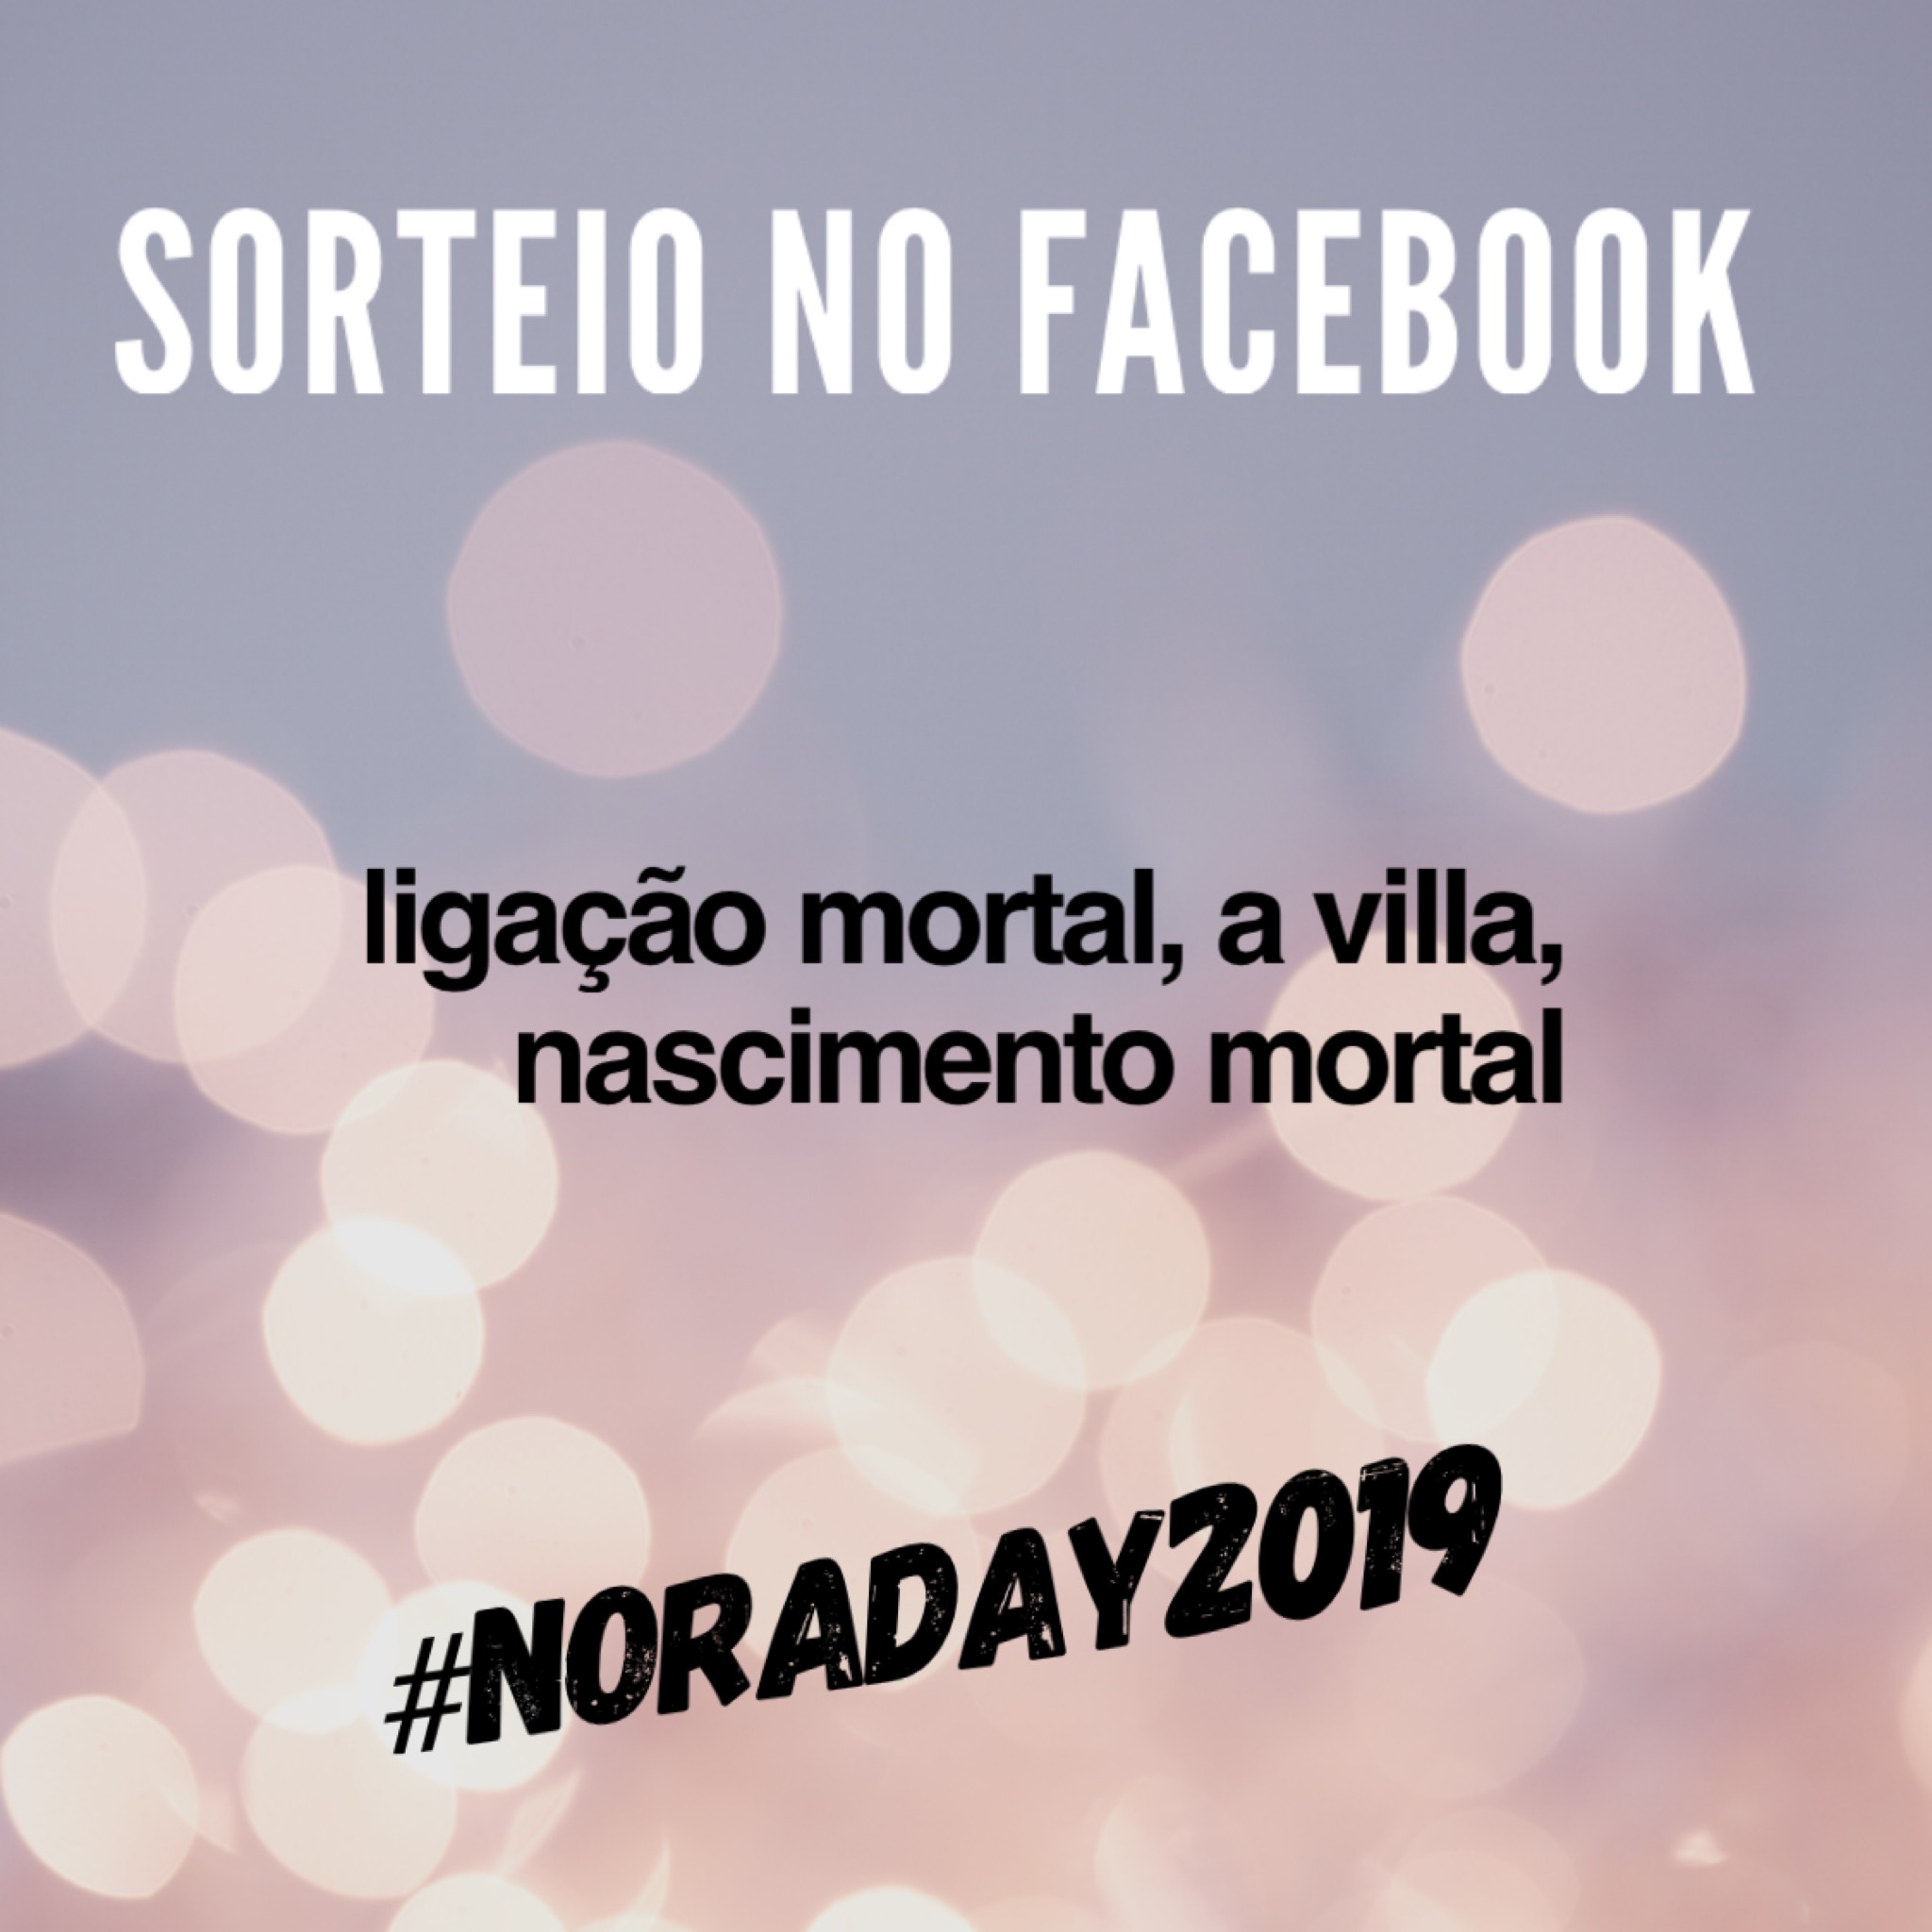 Nora Day 2019